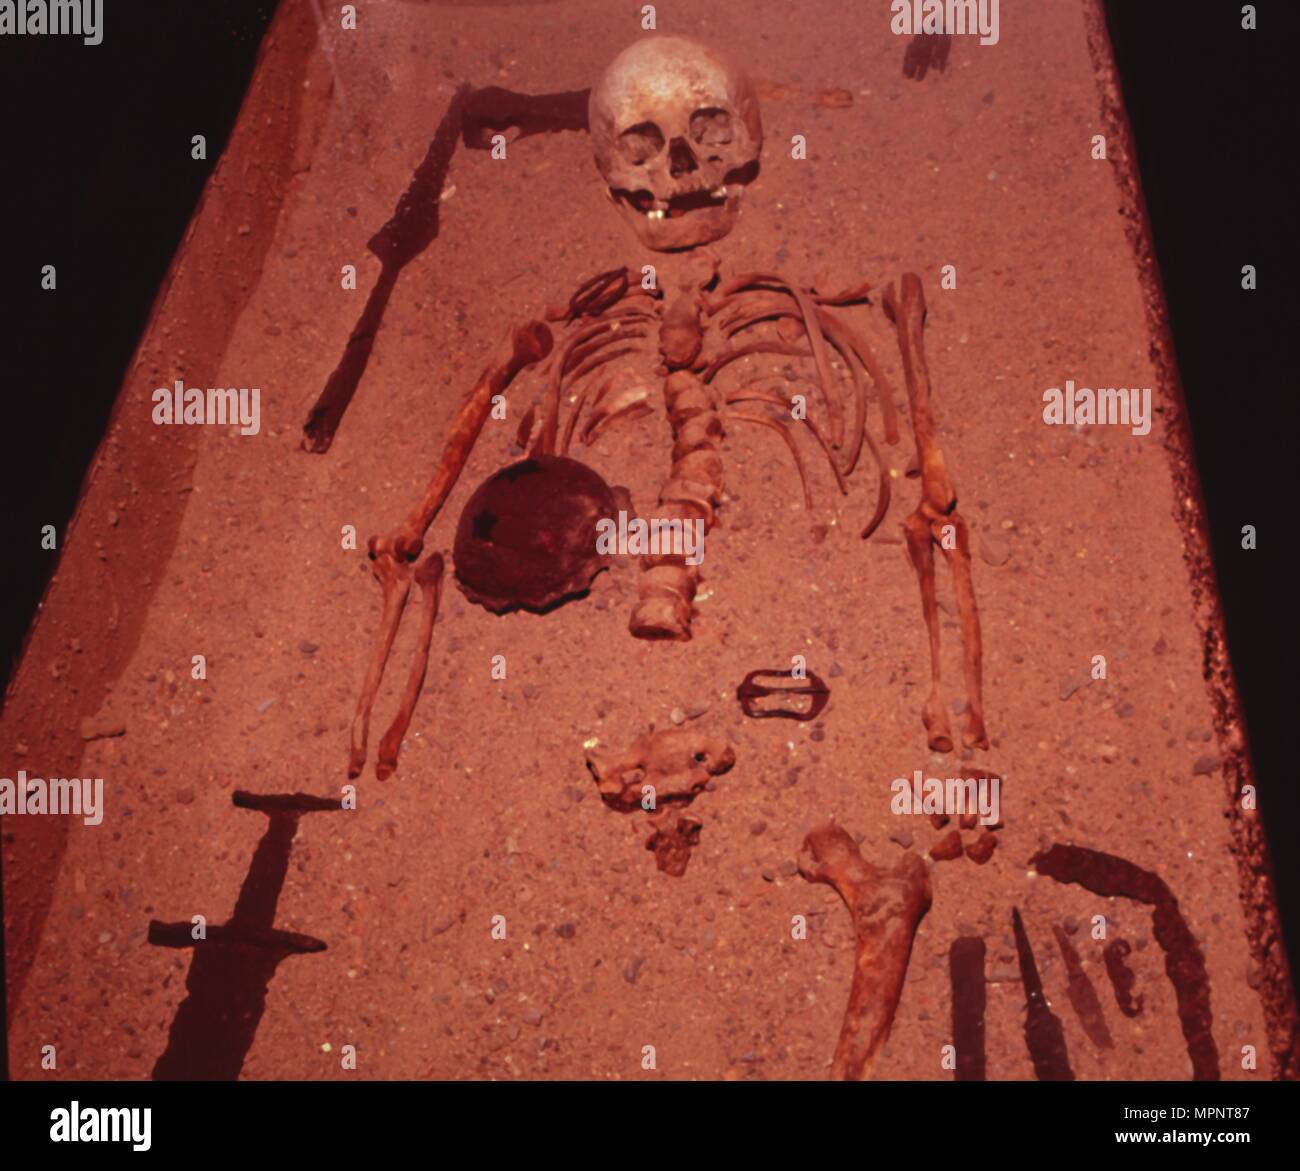 Viking Burial of Man with Axe, Spear, Sword , Knives, Shield and Belt Buckle, 9th-10th century. Artist: Unknown. Stock Photo